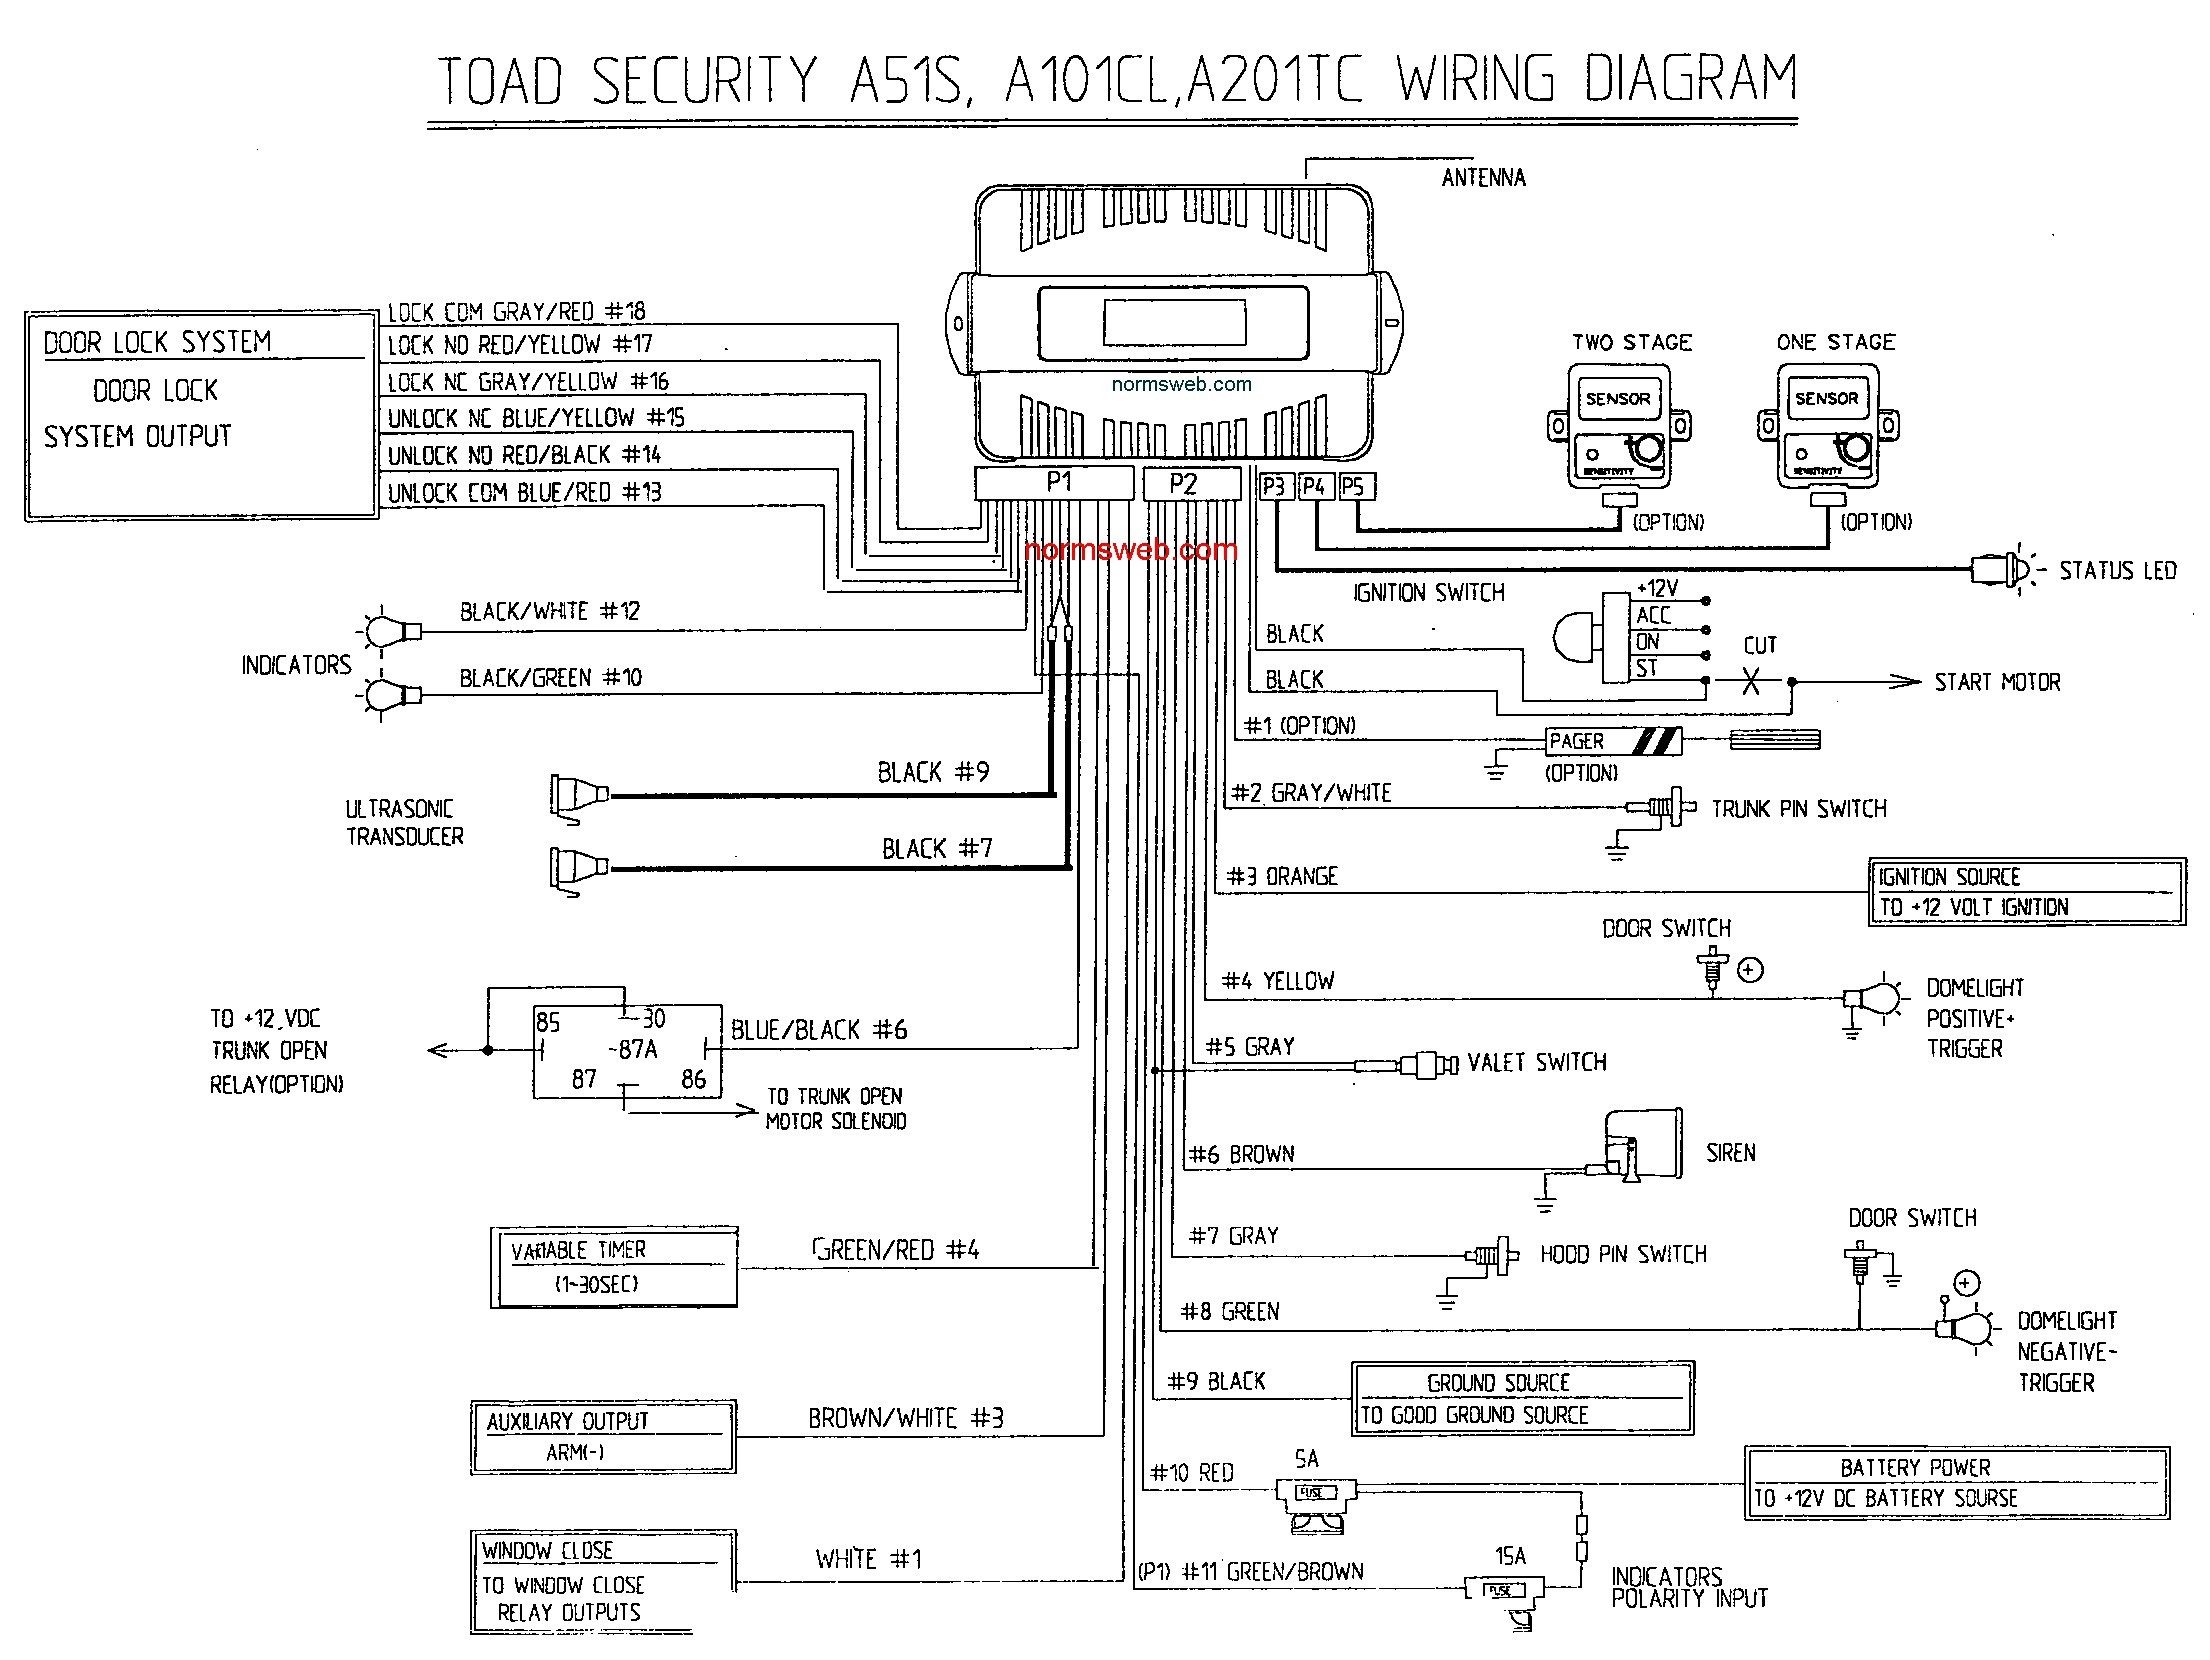 Acme Transformer Wiring Diagrams Fresh Bulldog Car And For Security Diagram Best Acmers With